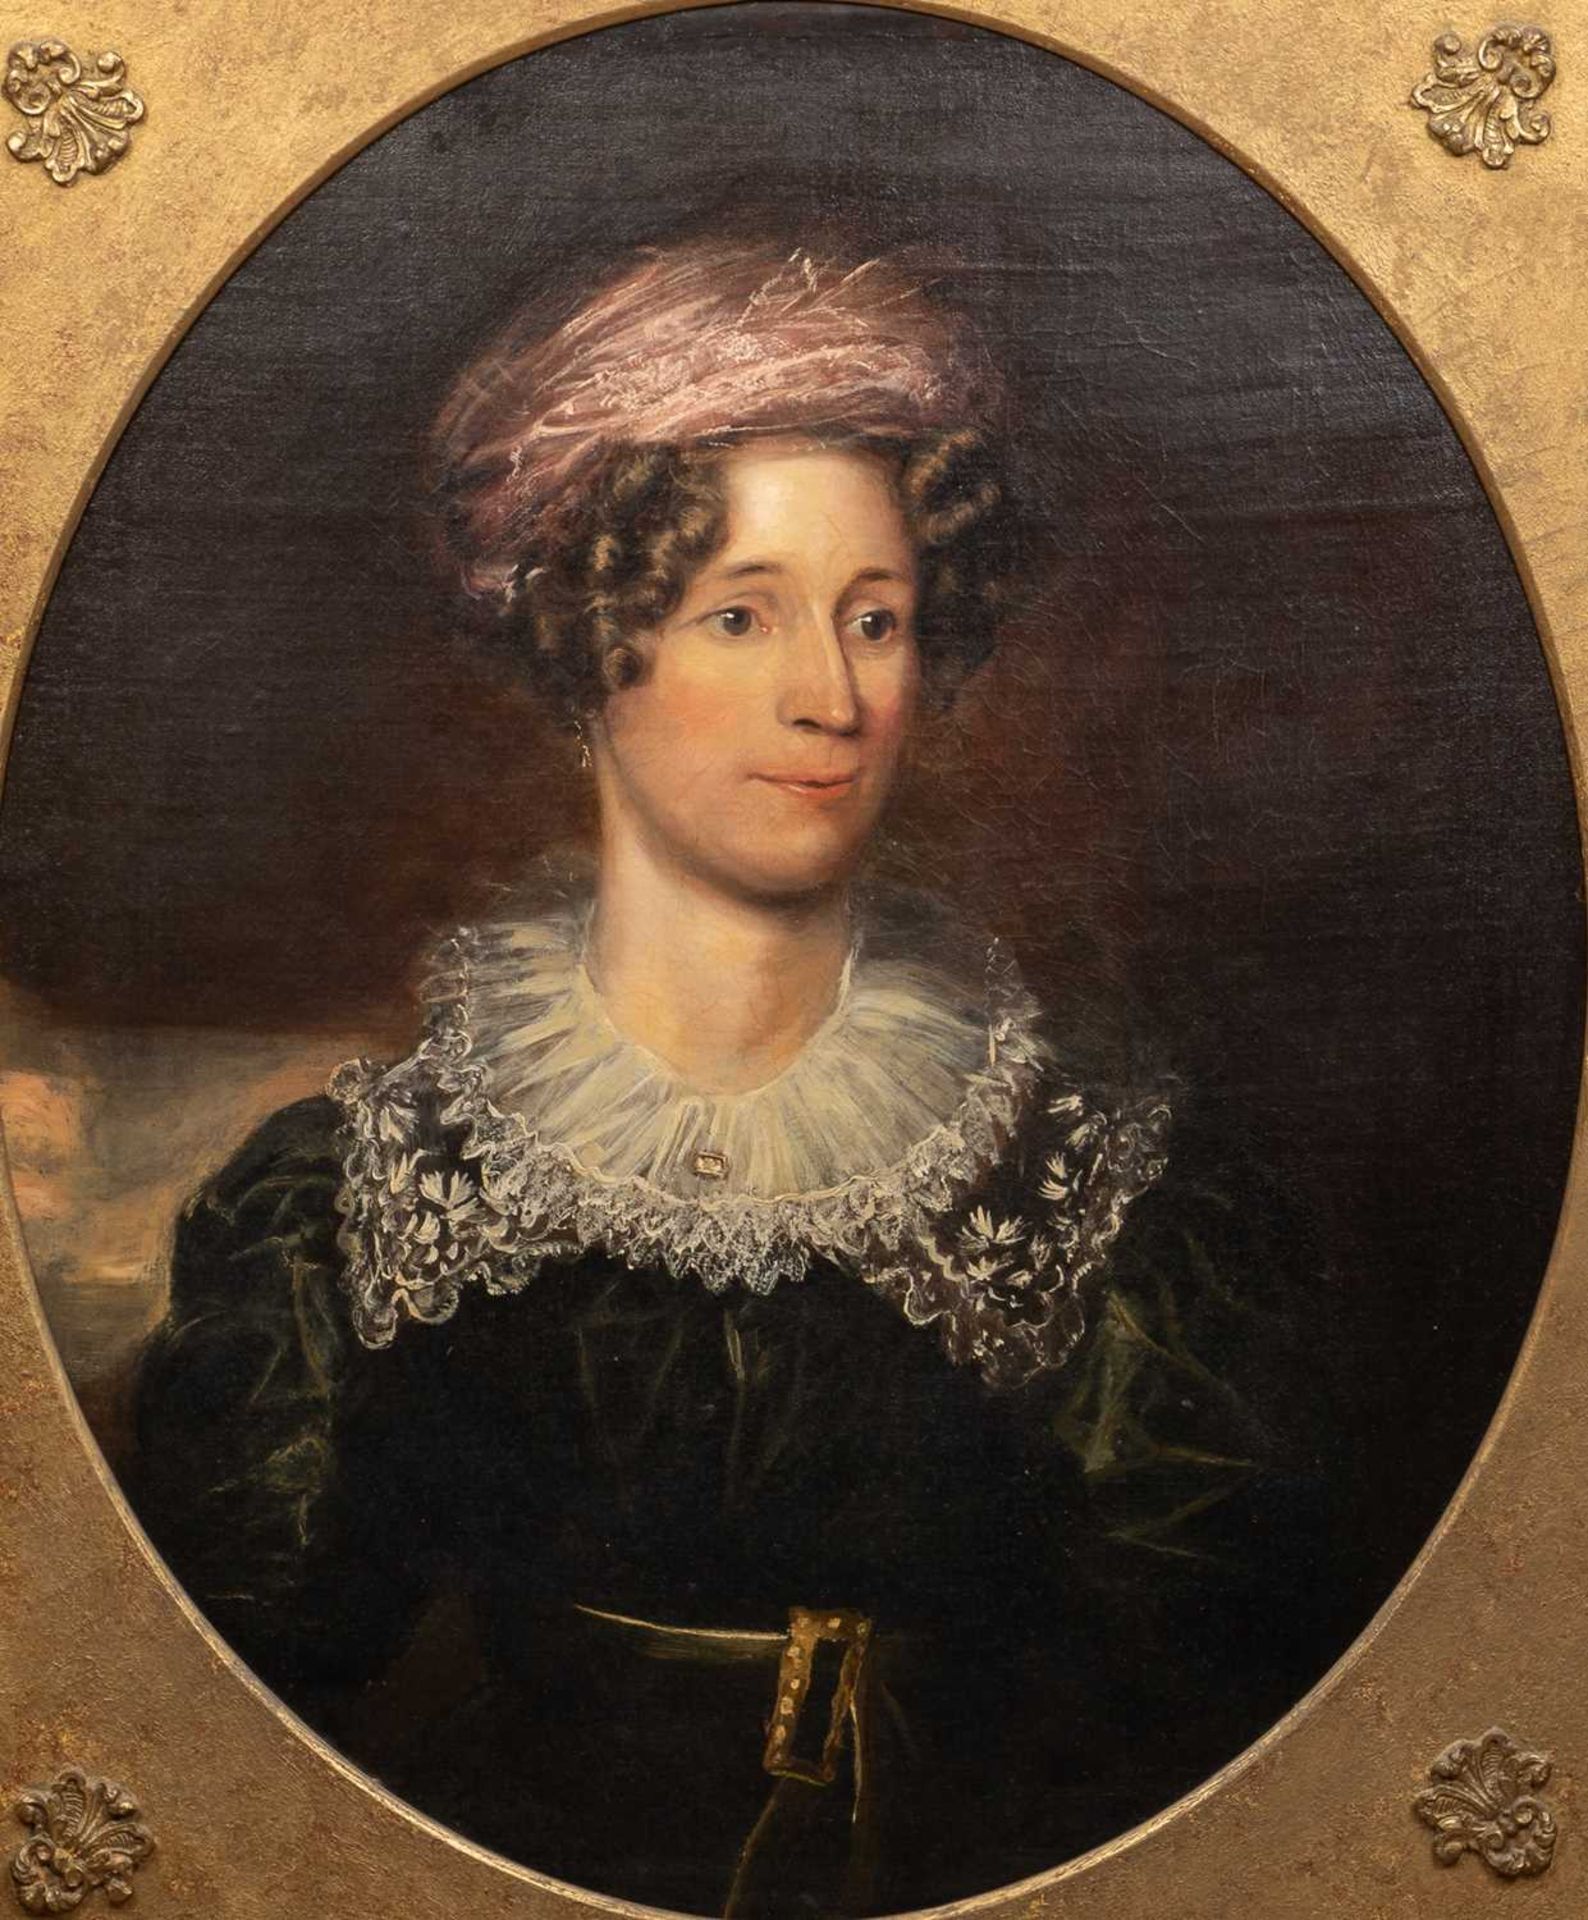 A portrait of an 18th century lady